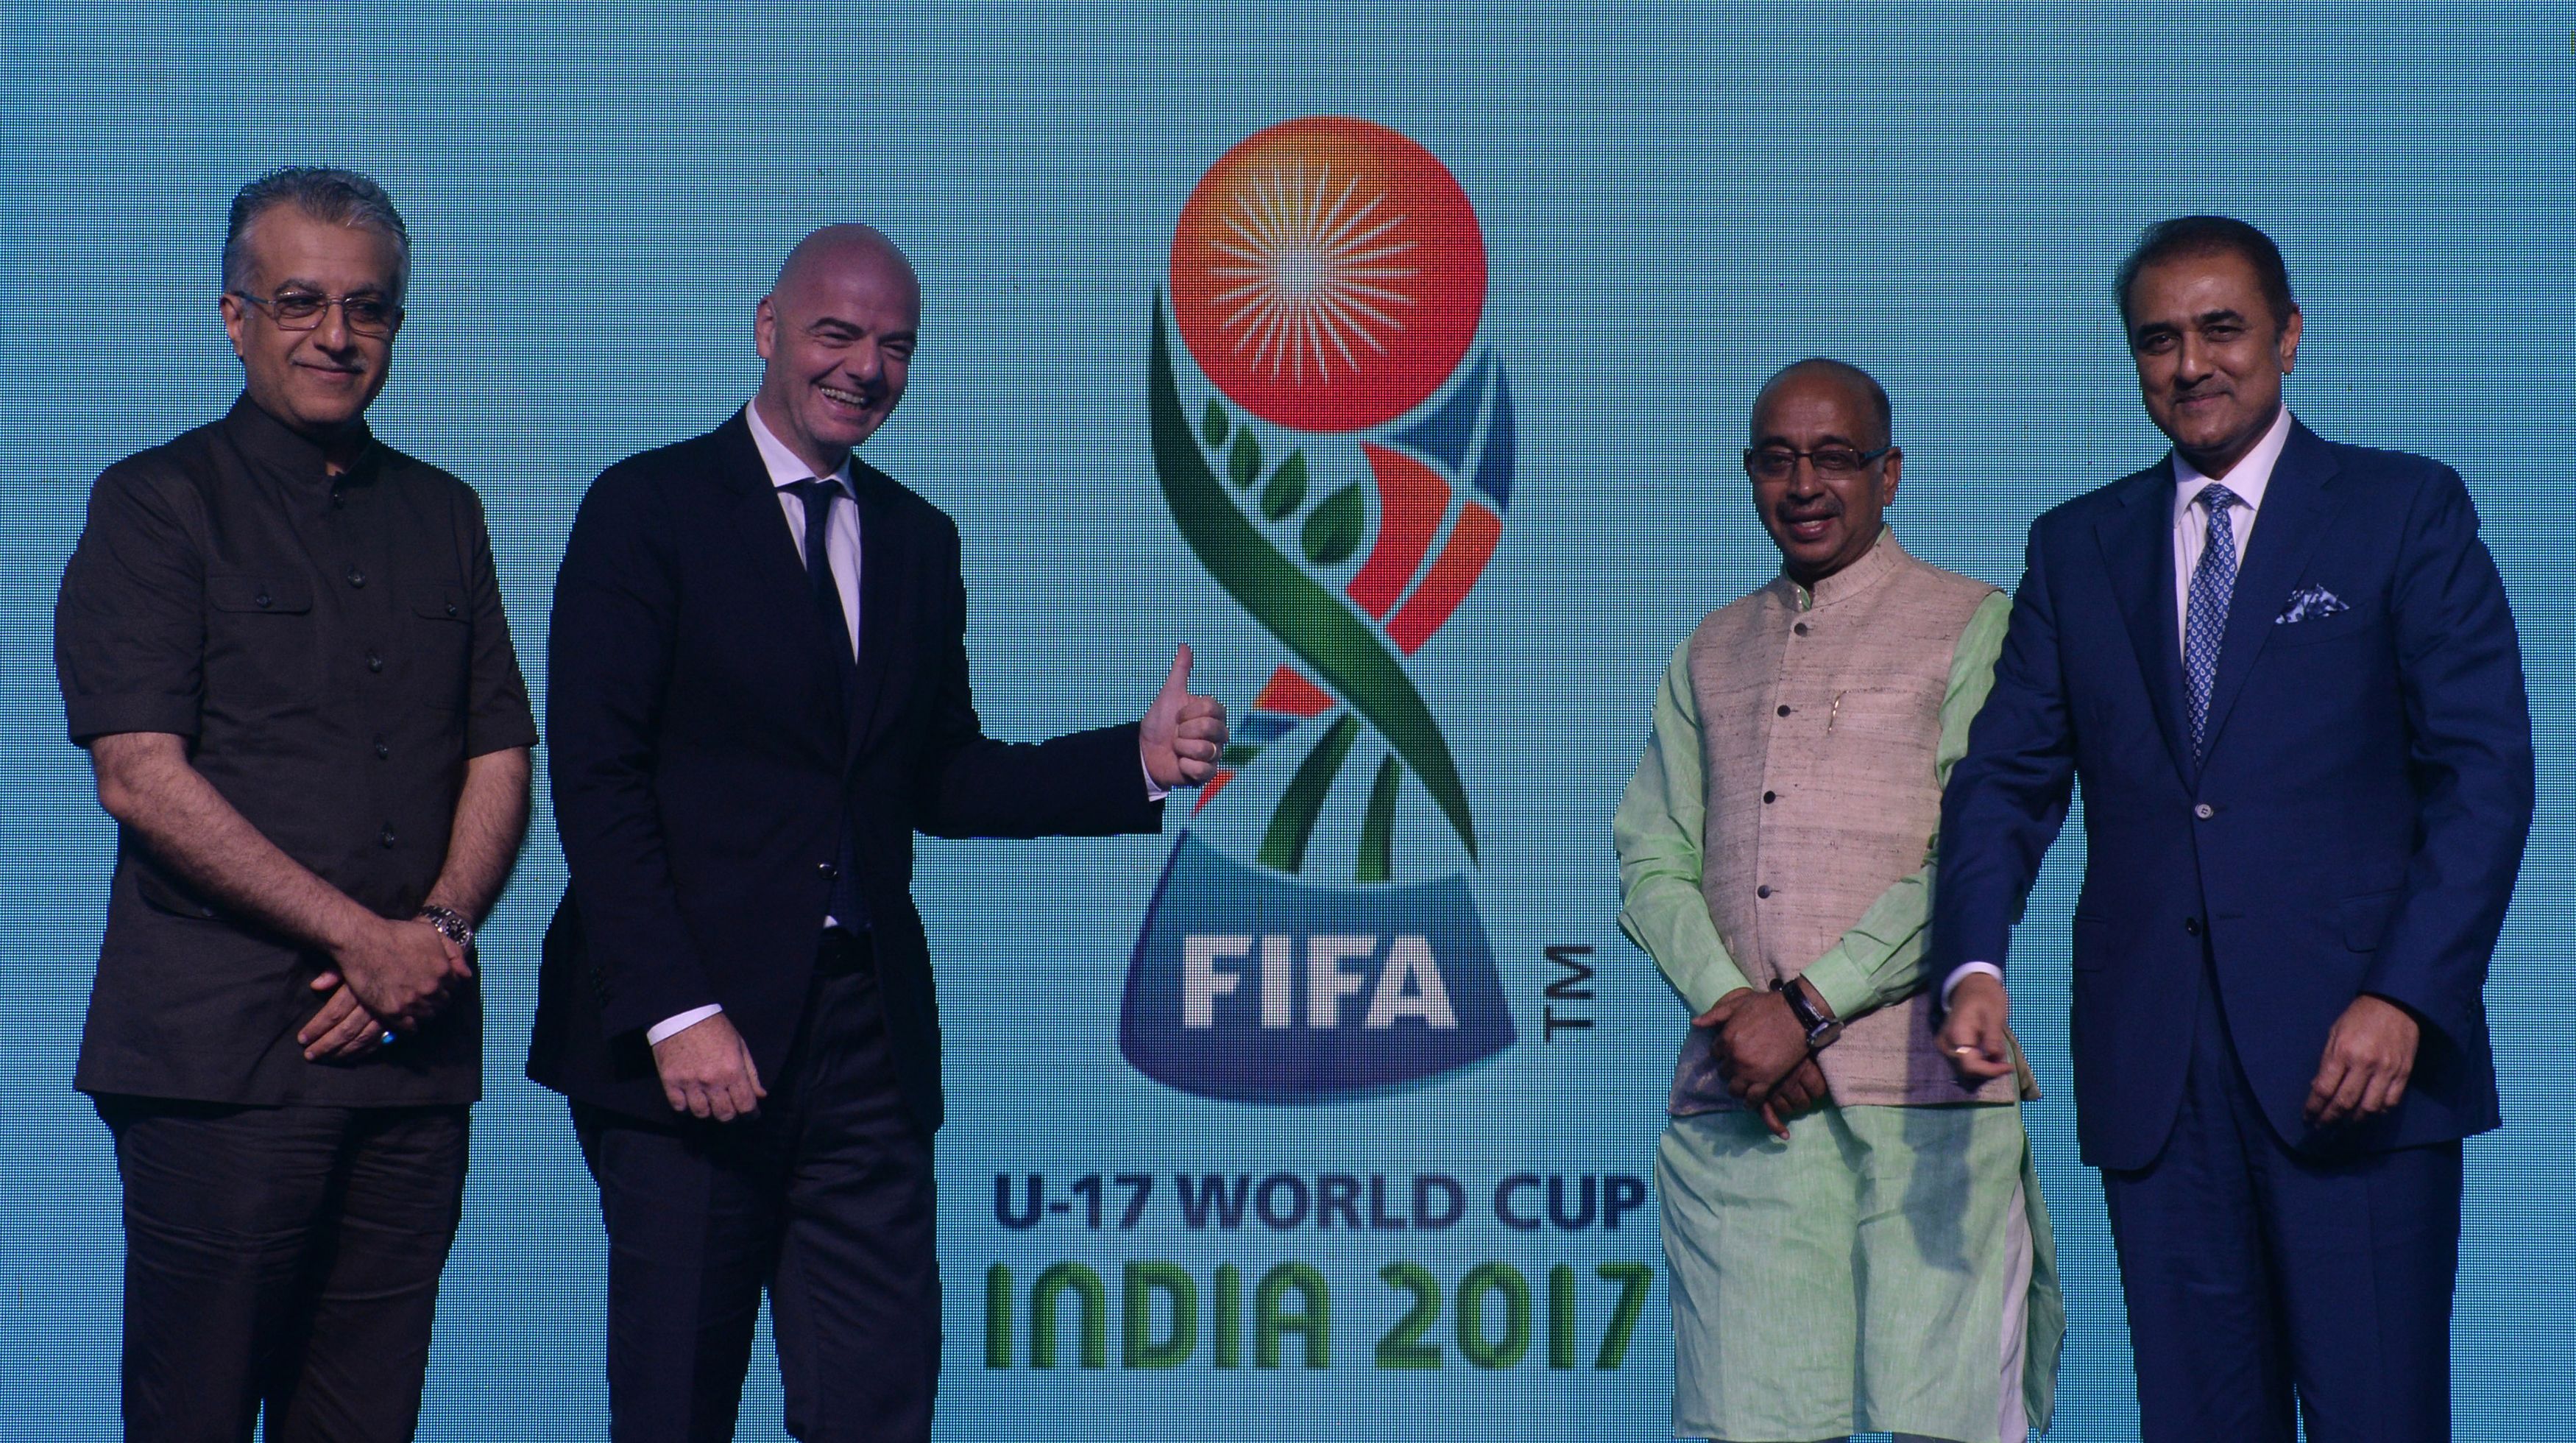 (L-R) President of the Asian Football Confederation (AFC) Shaikh Salman bin Ebrahim Al Khalifa, FIFA President Gianni Infantino, Indian Minister for Youth Affairs and Sports Vijay Goel and President All India Football Federation (AIFF) Praful Patel pose after unveiling the logo for the FIFA U-17 World Cup India 2017 in Panjim on September 27, 2016.
Infantino was also in Goa to attend the Asian Football Confederation (AFC) Extraordinary Congress. / AFP / INDRANIL MUKHERJEE        (Photo credit should read INDRANIL MUKHERJEE/AFP/Getty Images)